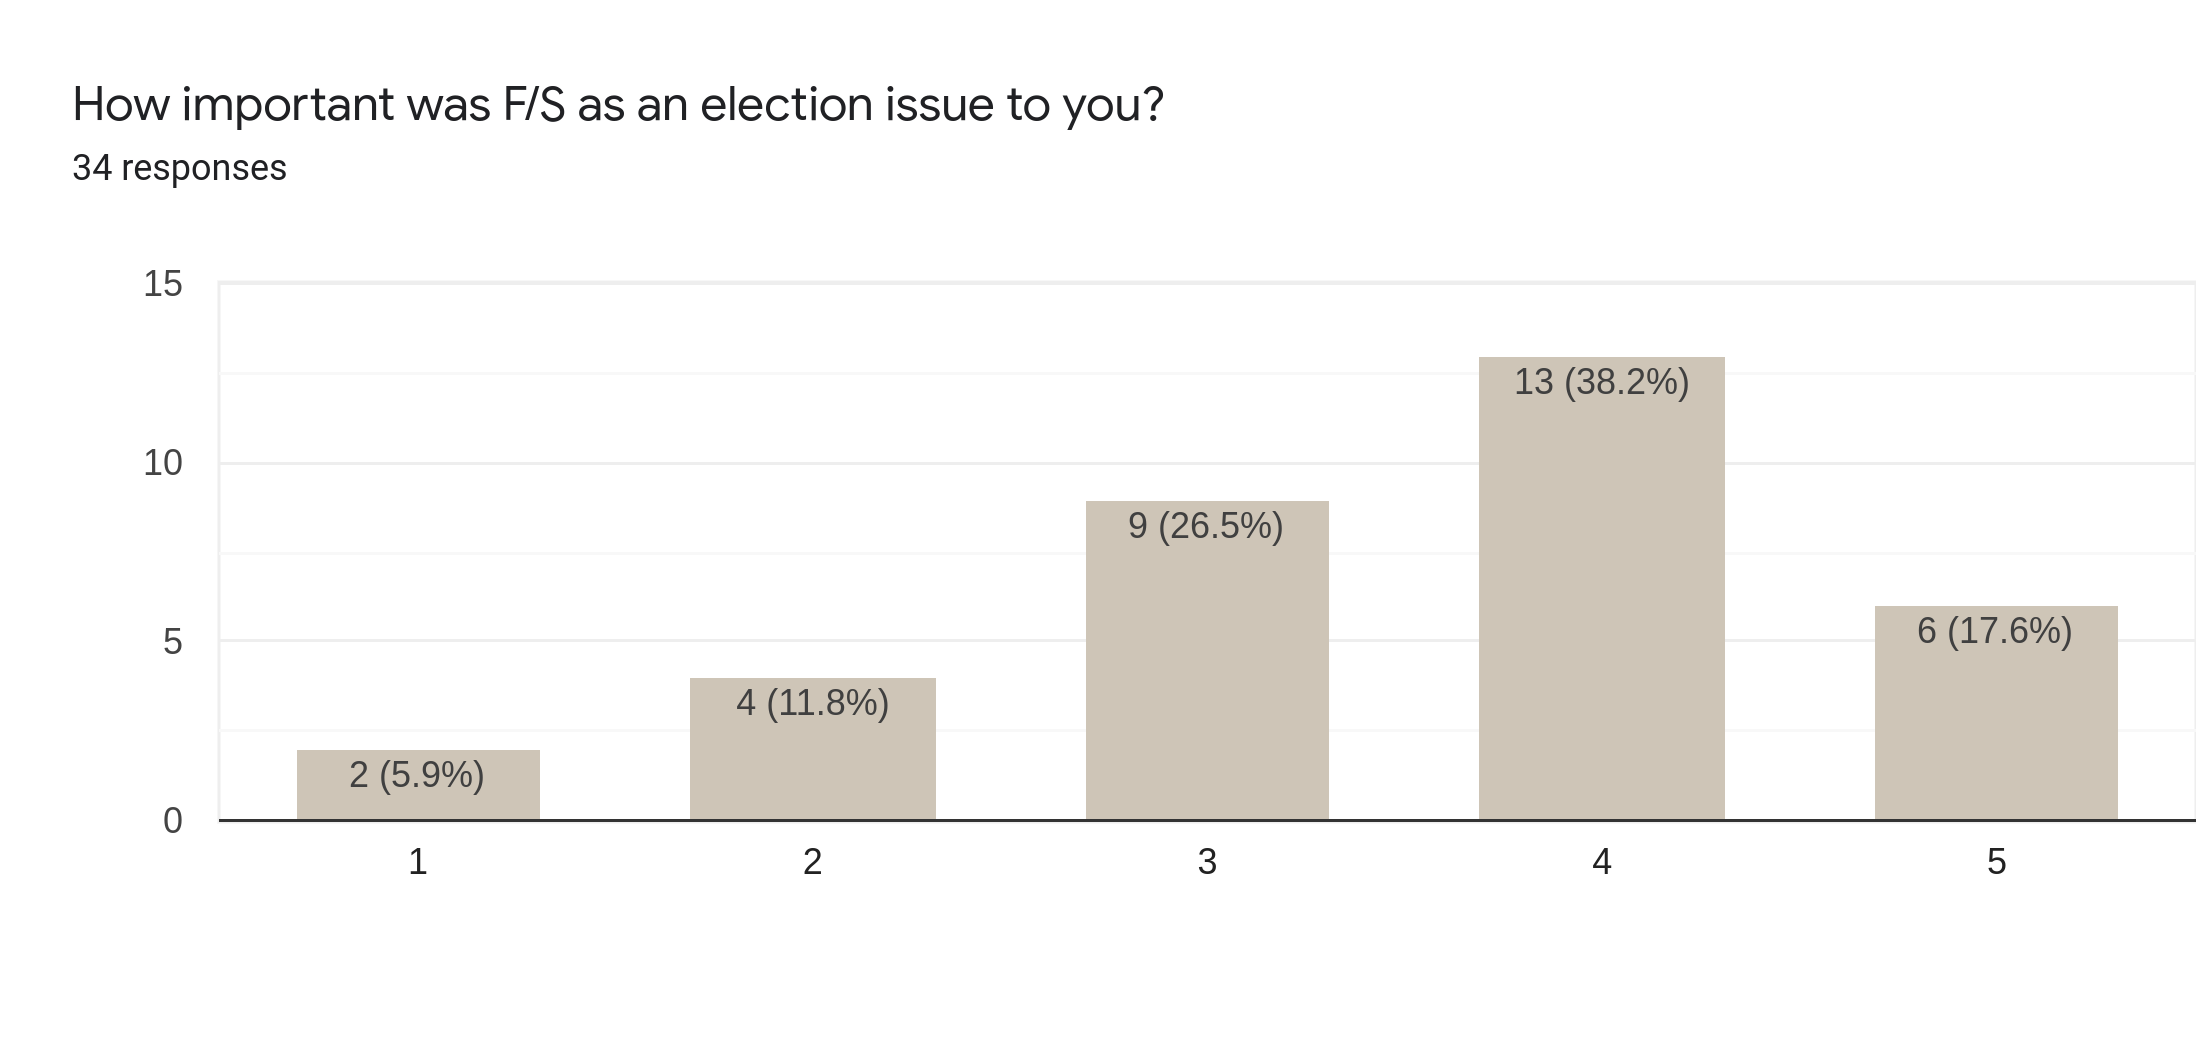 Forms response chart. Question title: How important was F/S as an election issue to you?. Number of responses: 34 responses.